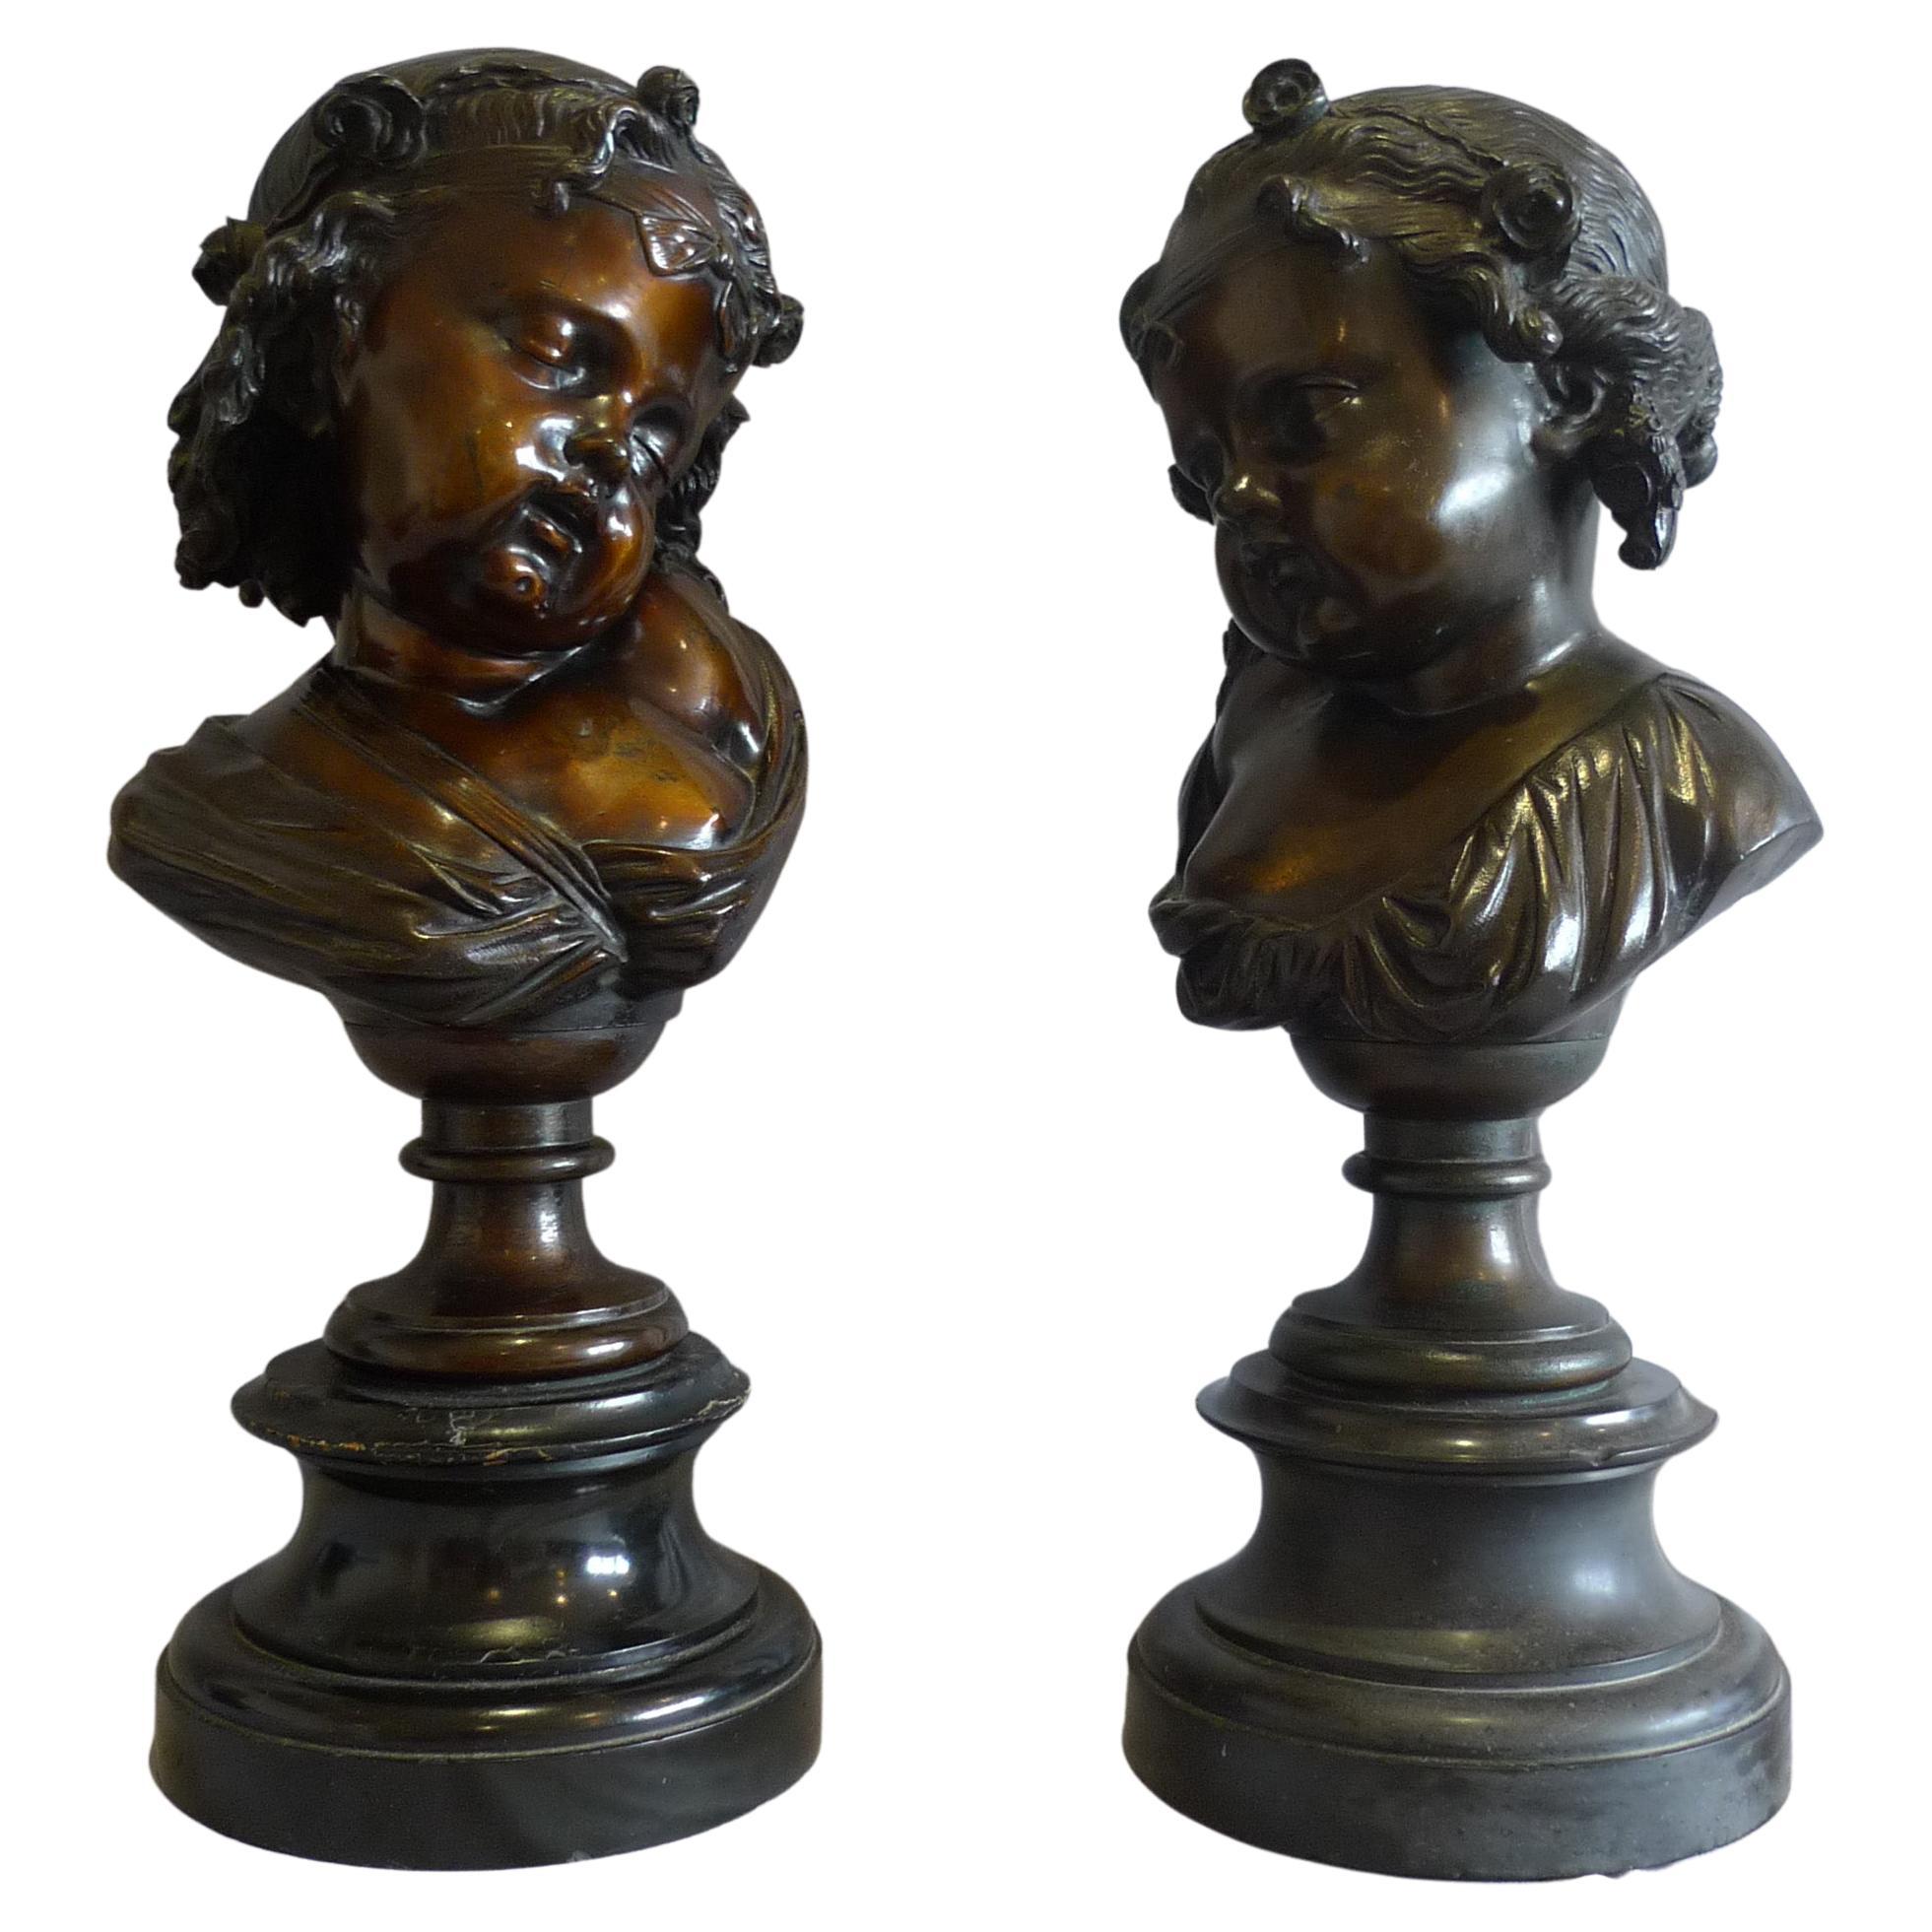  Pair of bronze busts of childs' heads on marble bases. For Sale